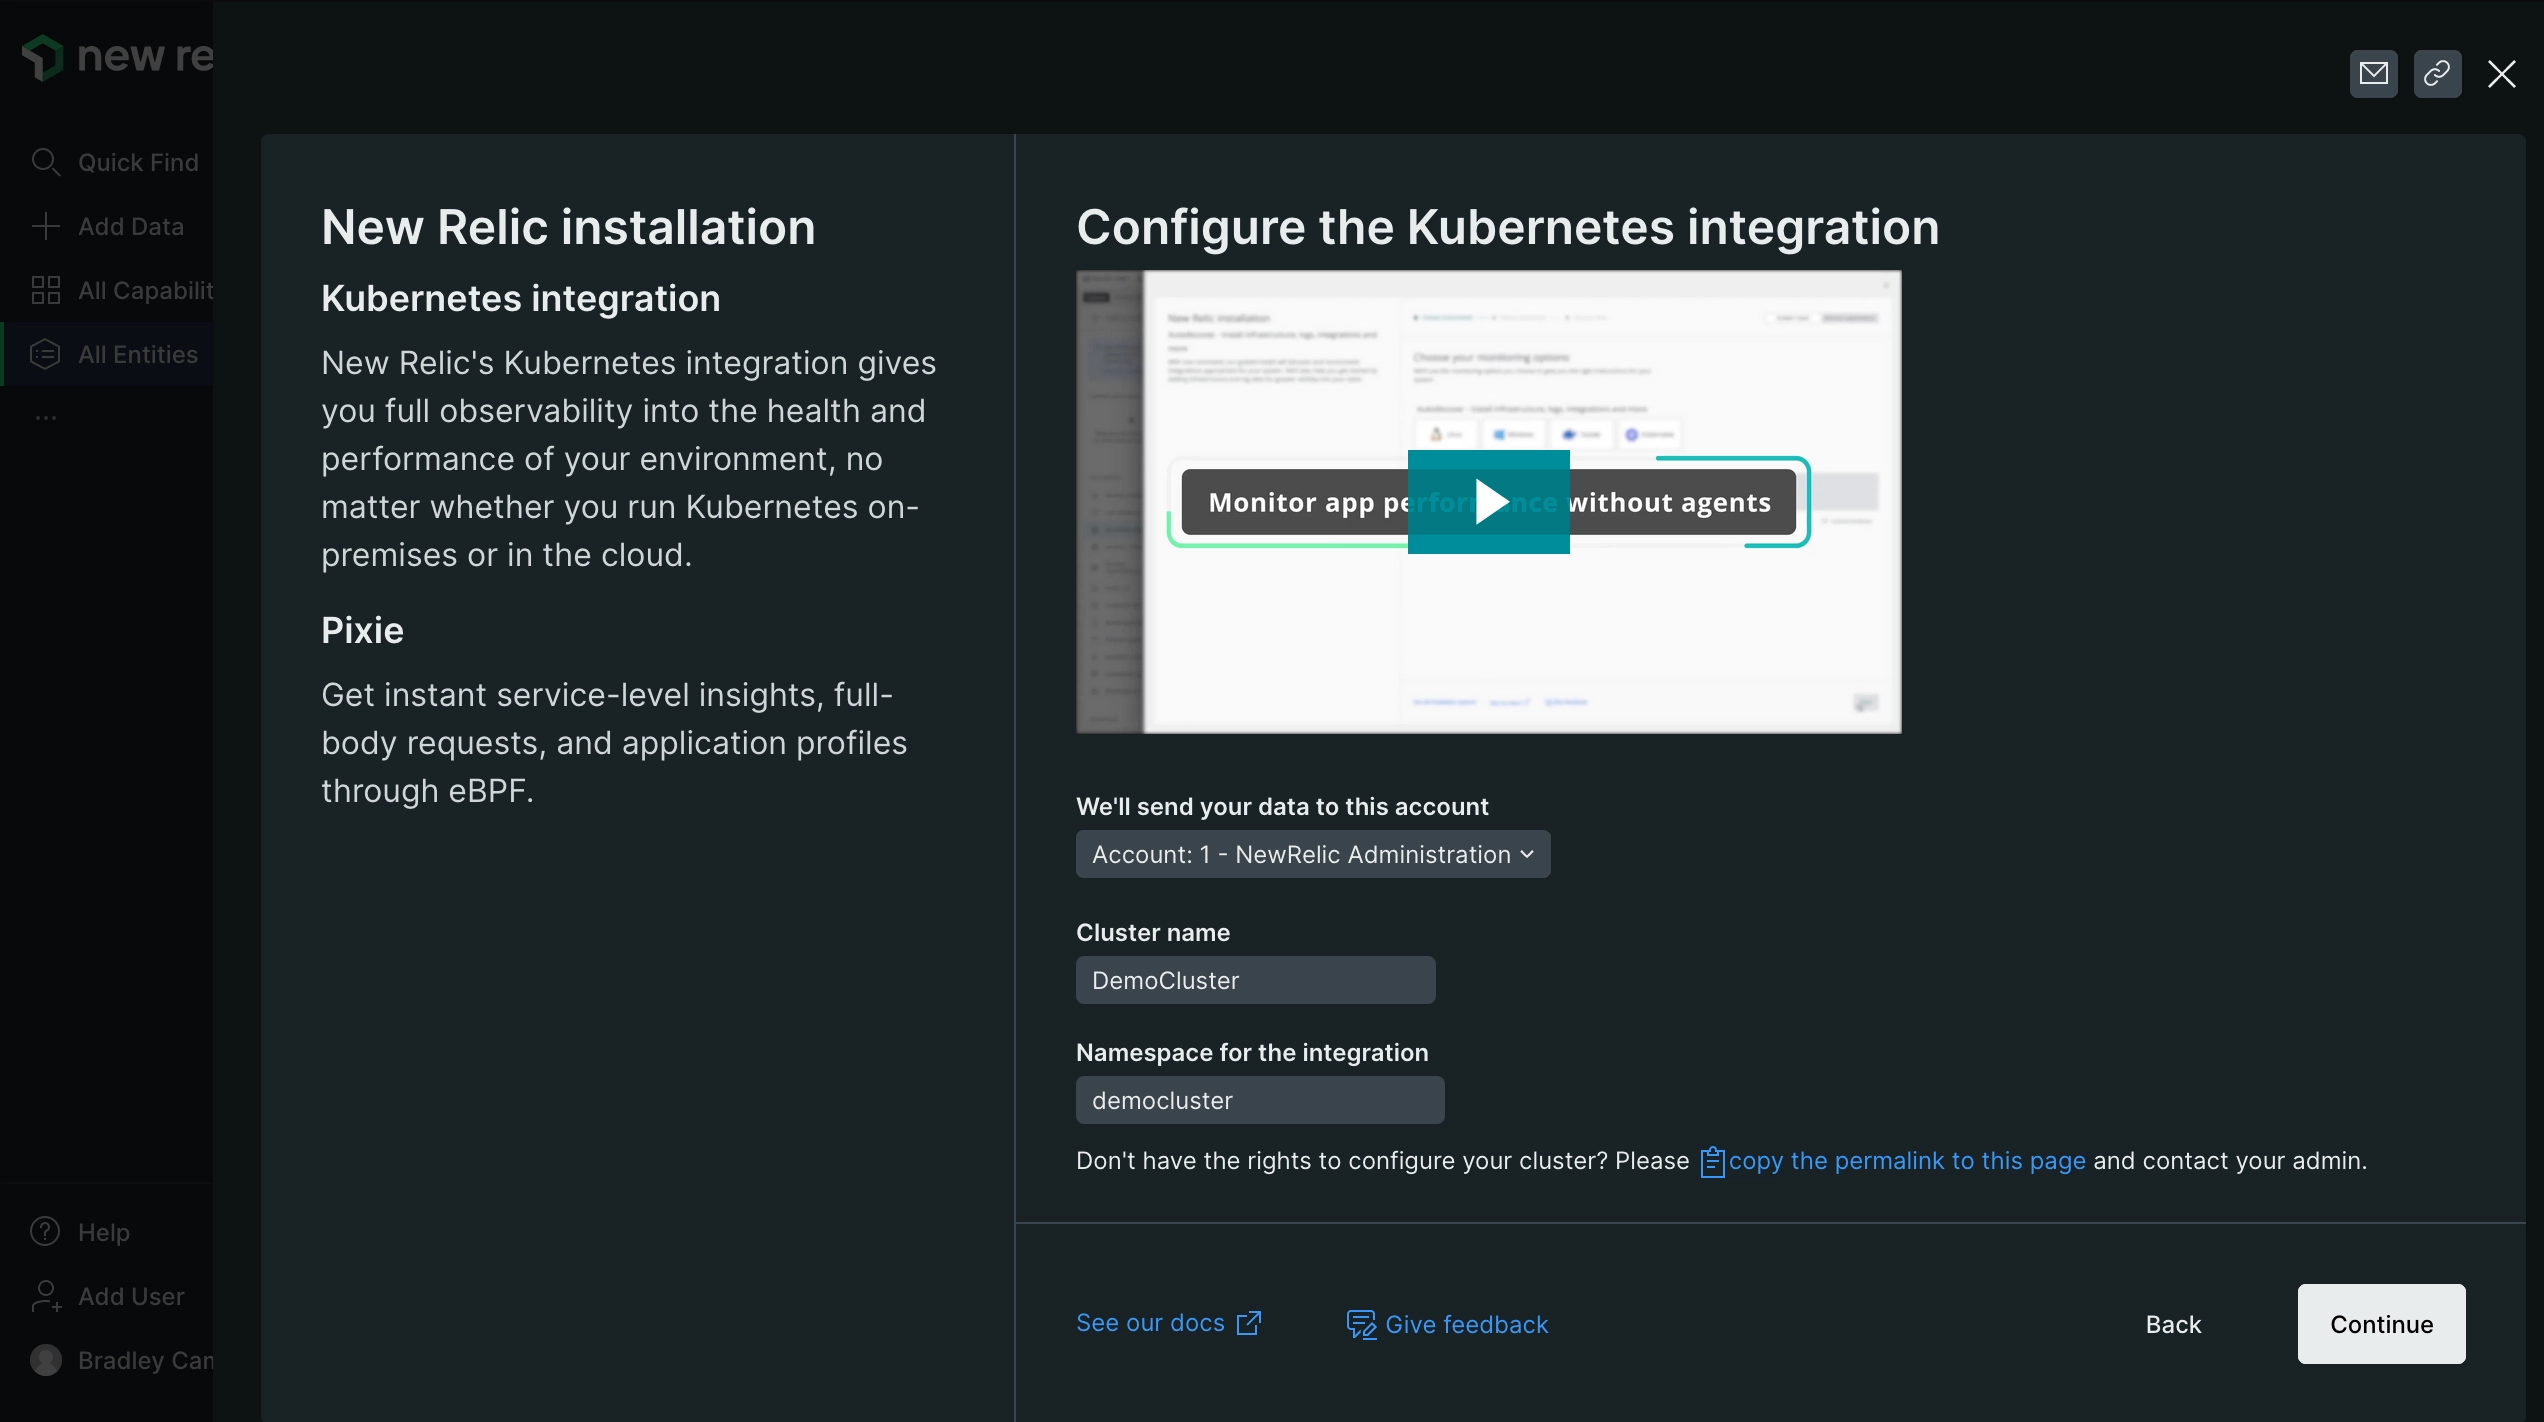 A screenshot showing guided install flow for Kubernetes in the New Relic UI.